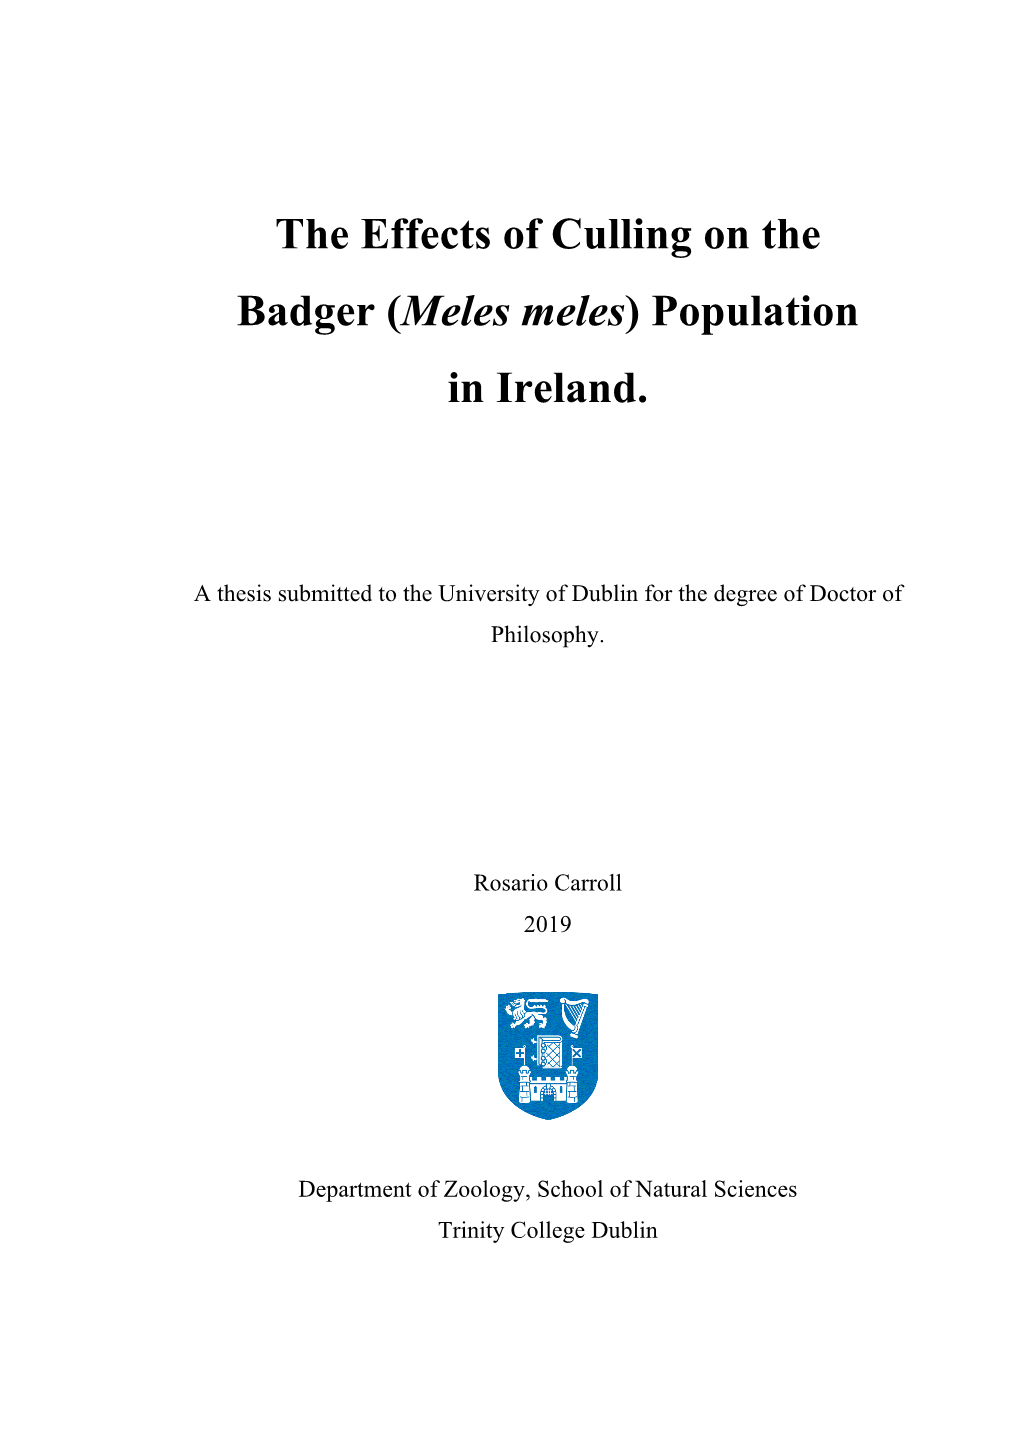 The Effects of Culling on the Badger (Meles Meles) Population in Ireland